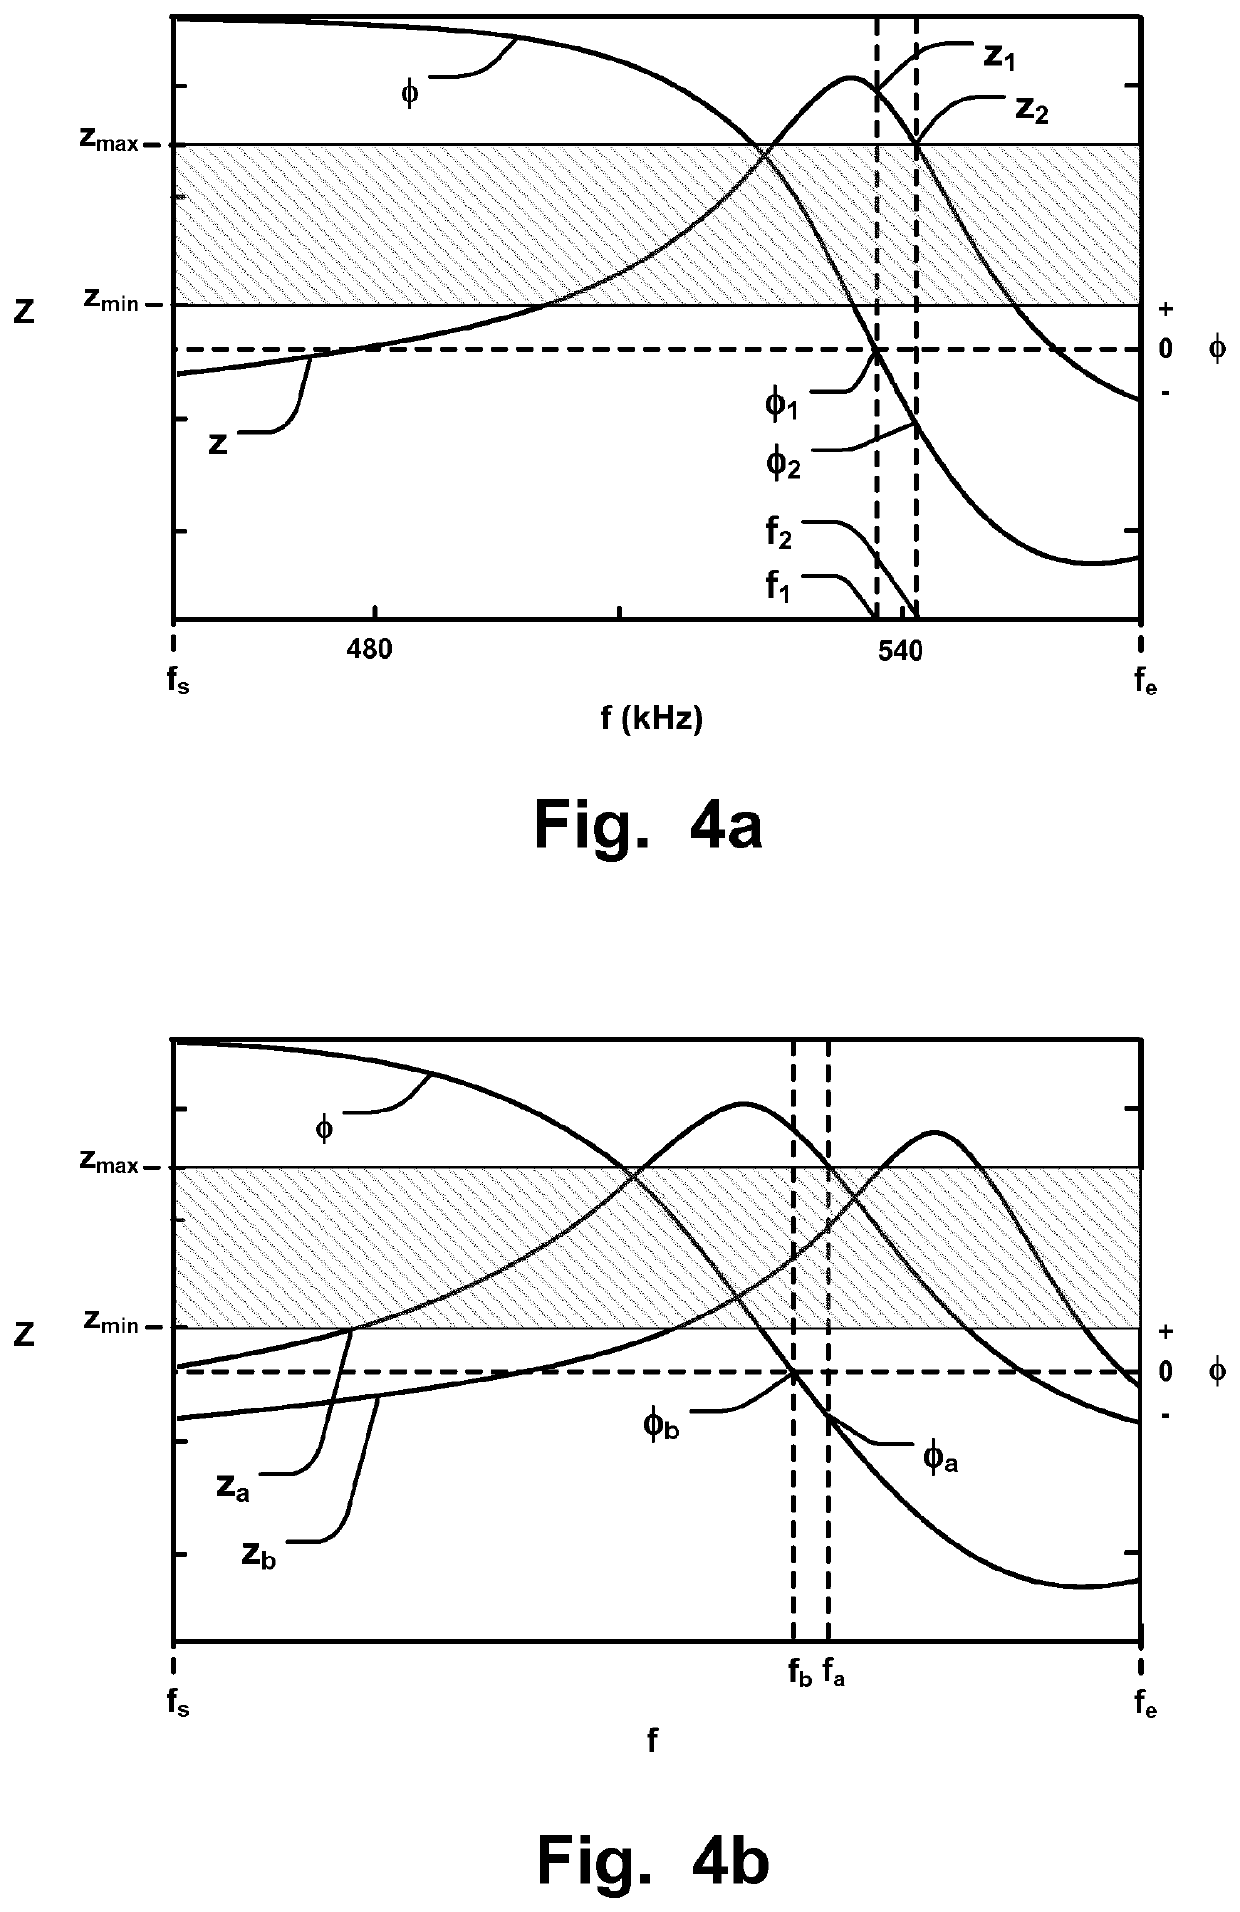 A method of controlling an inductive heating circuit to seal a packaging material